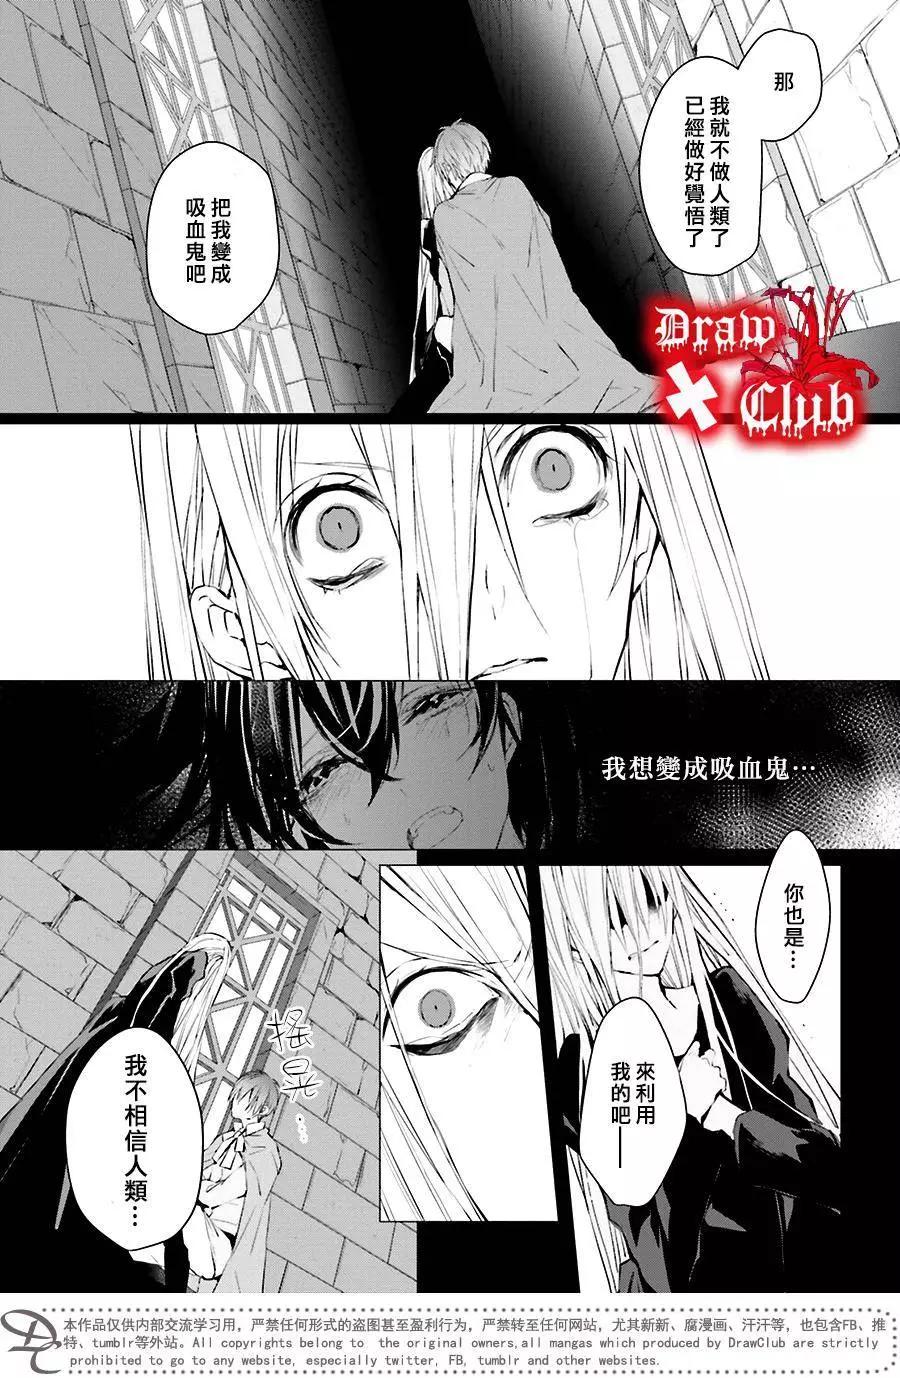 Bloody Mary - 第33回 - 6